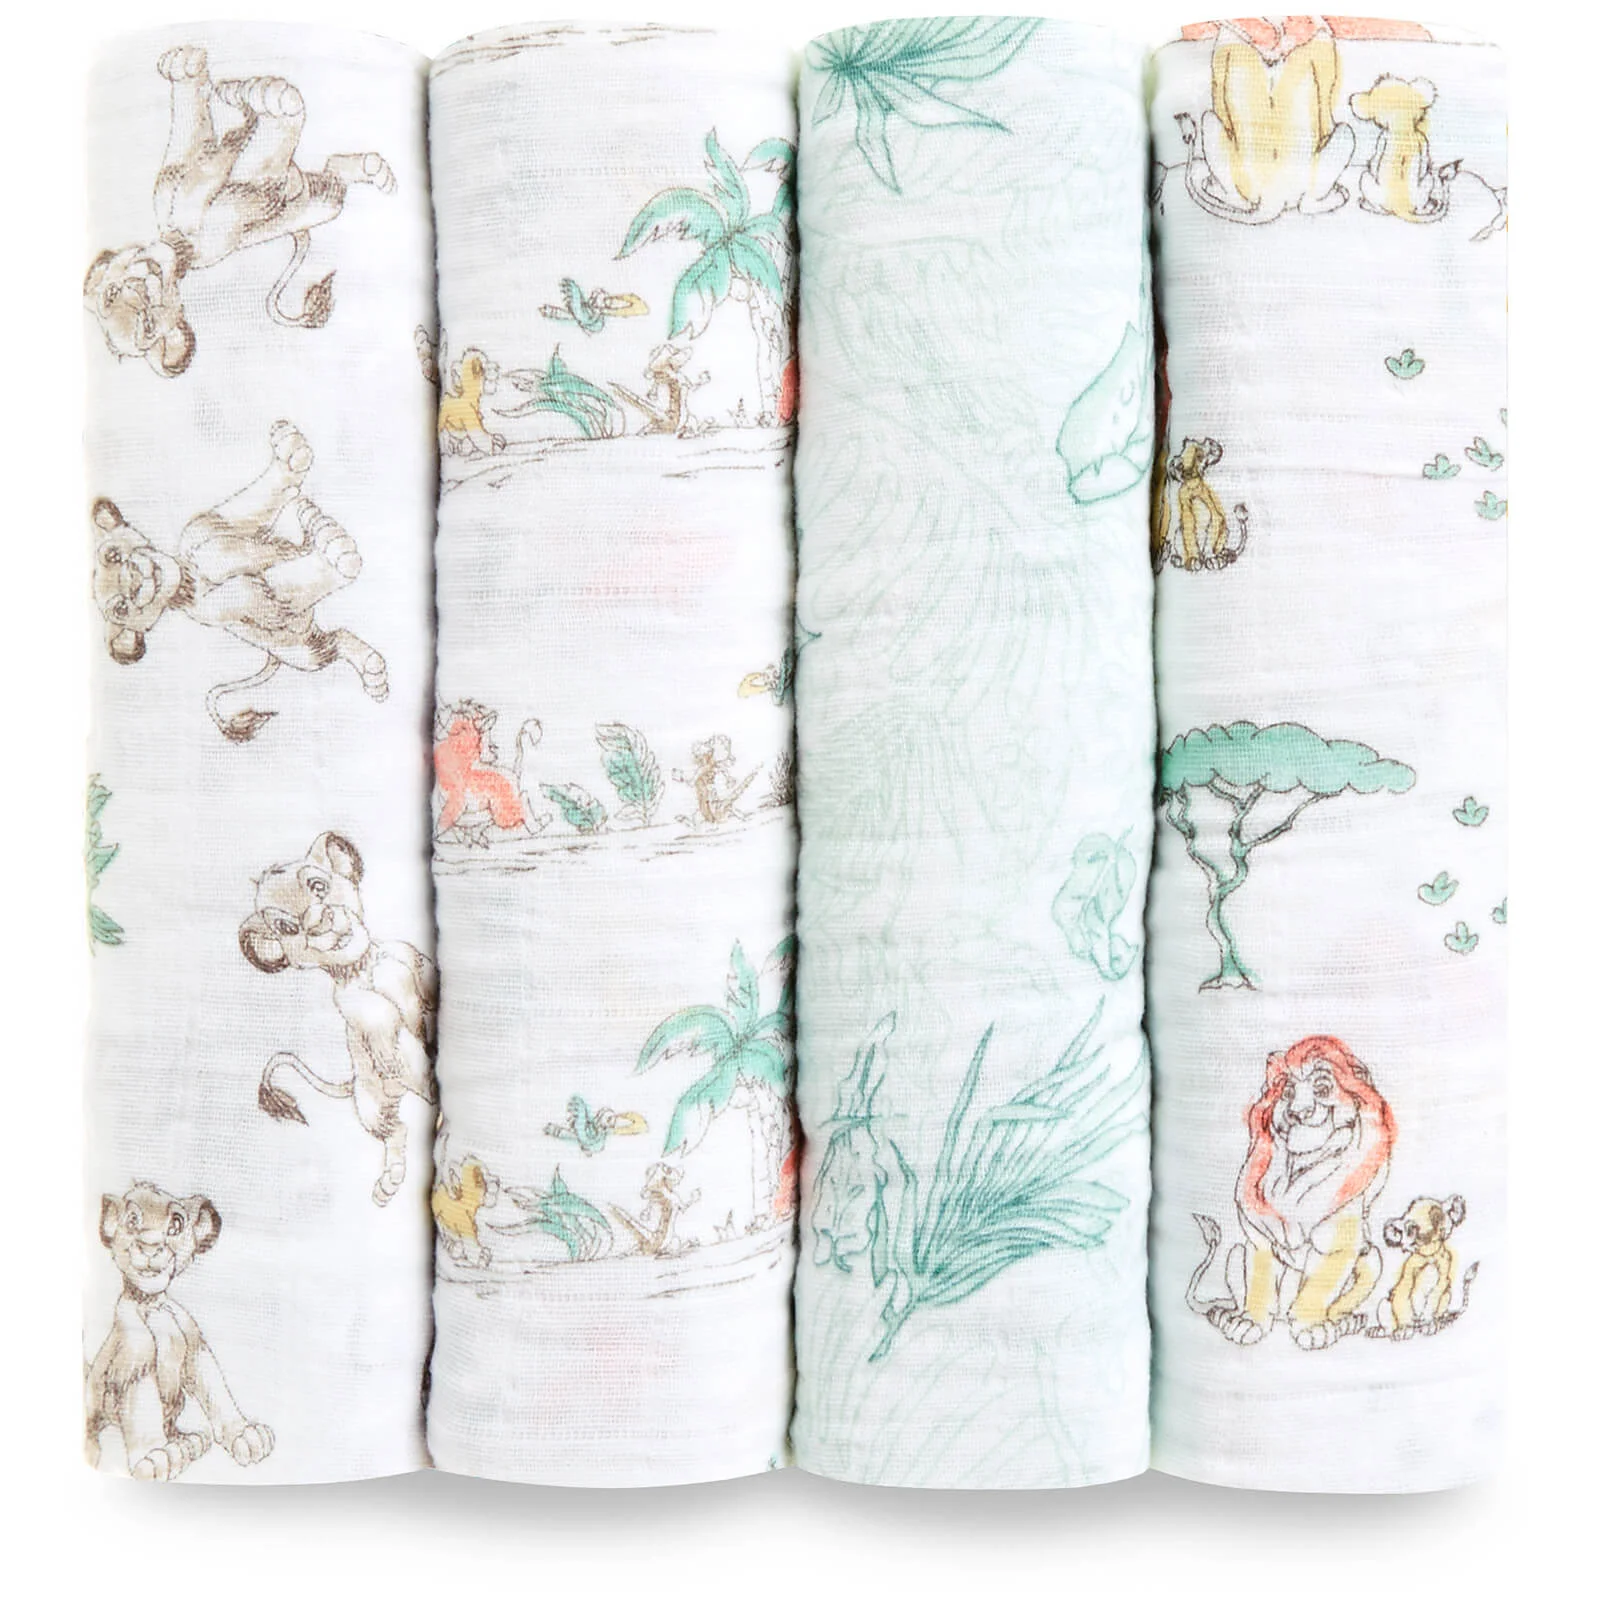 aden + anais Classic Swaddle 4-Pack Lion King Image 1